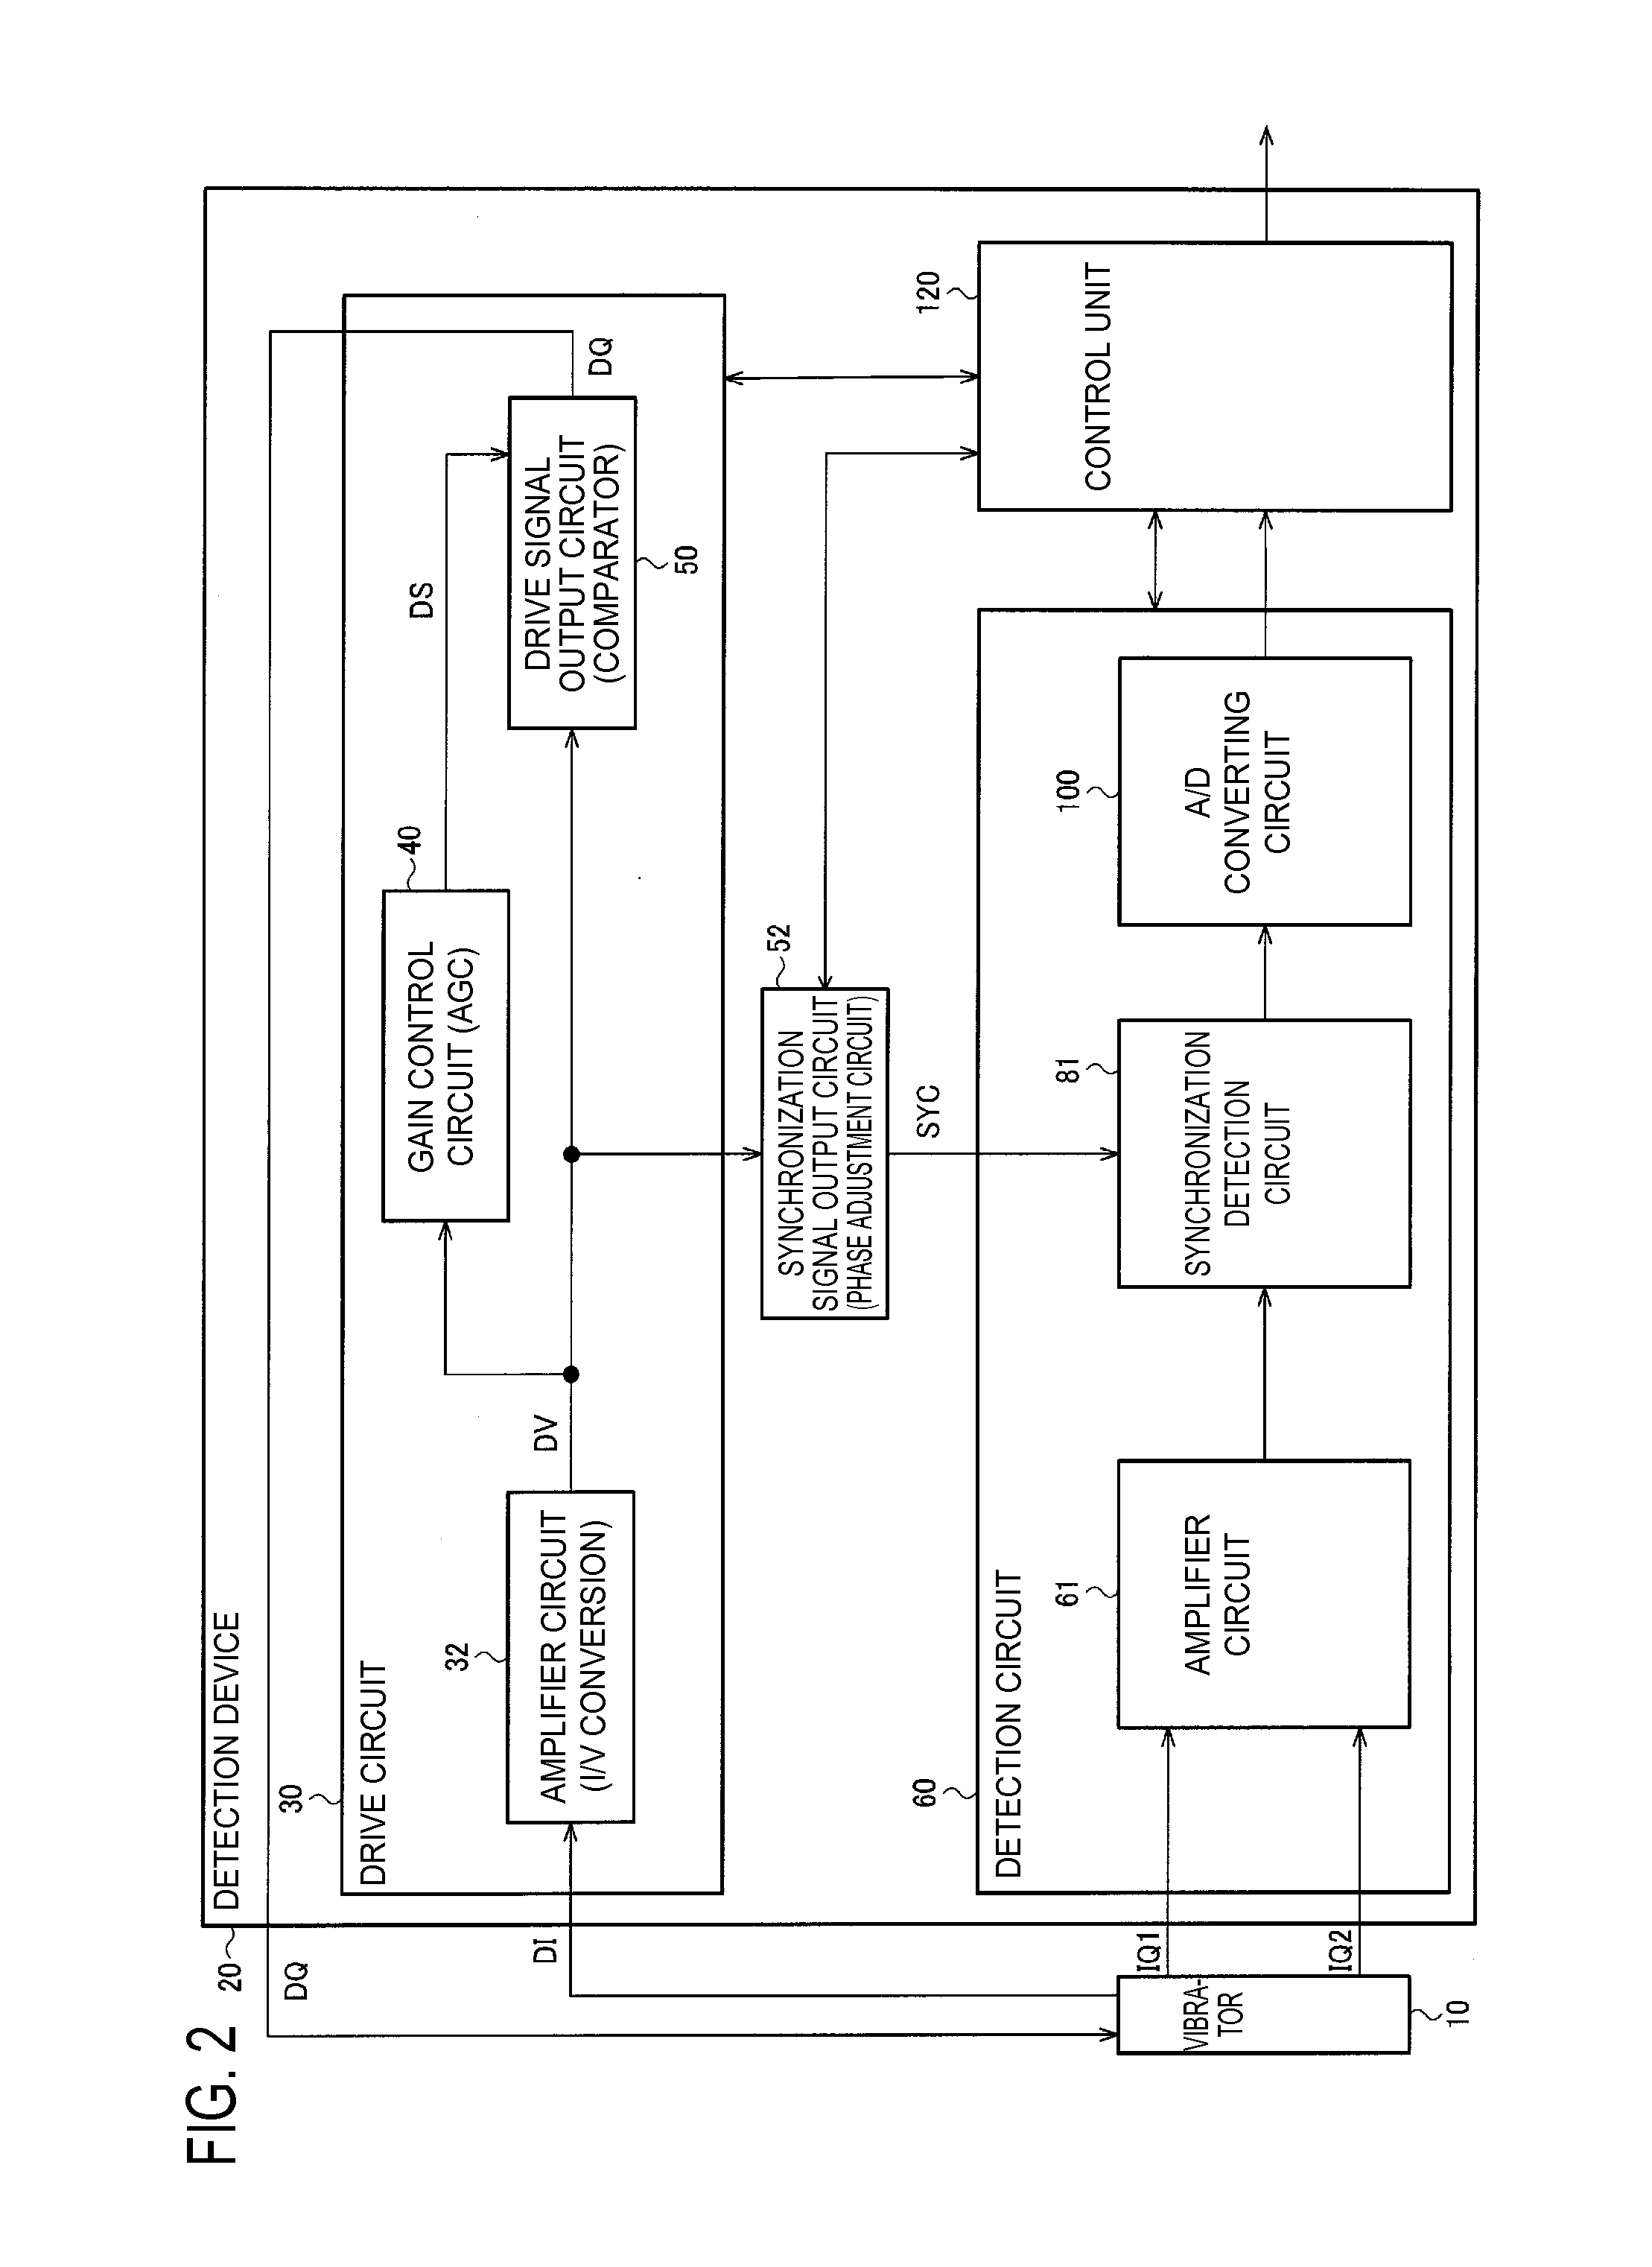 Detection device, sensor, electronic apparatus and moving object